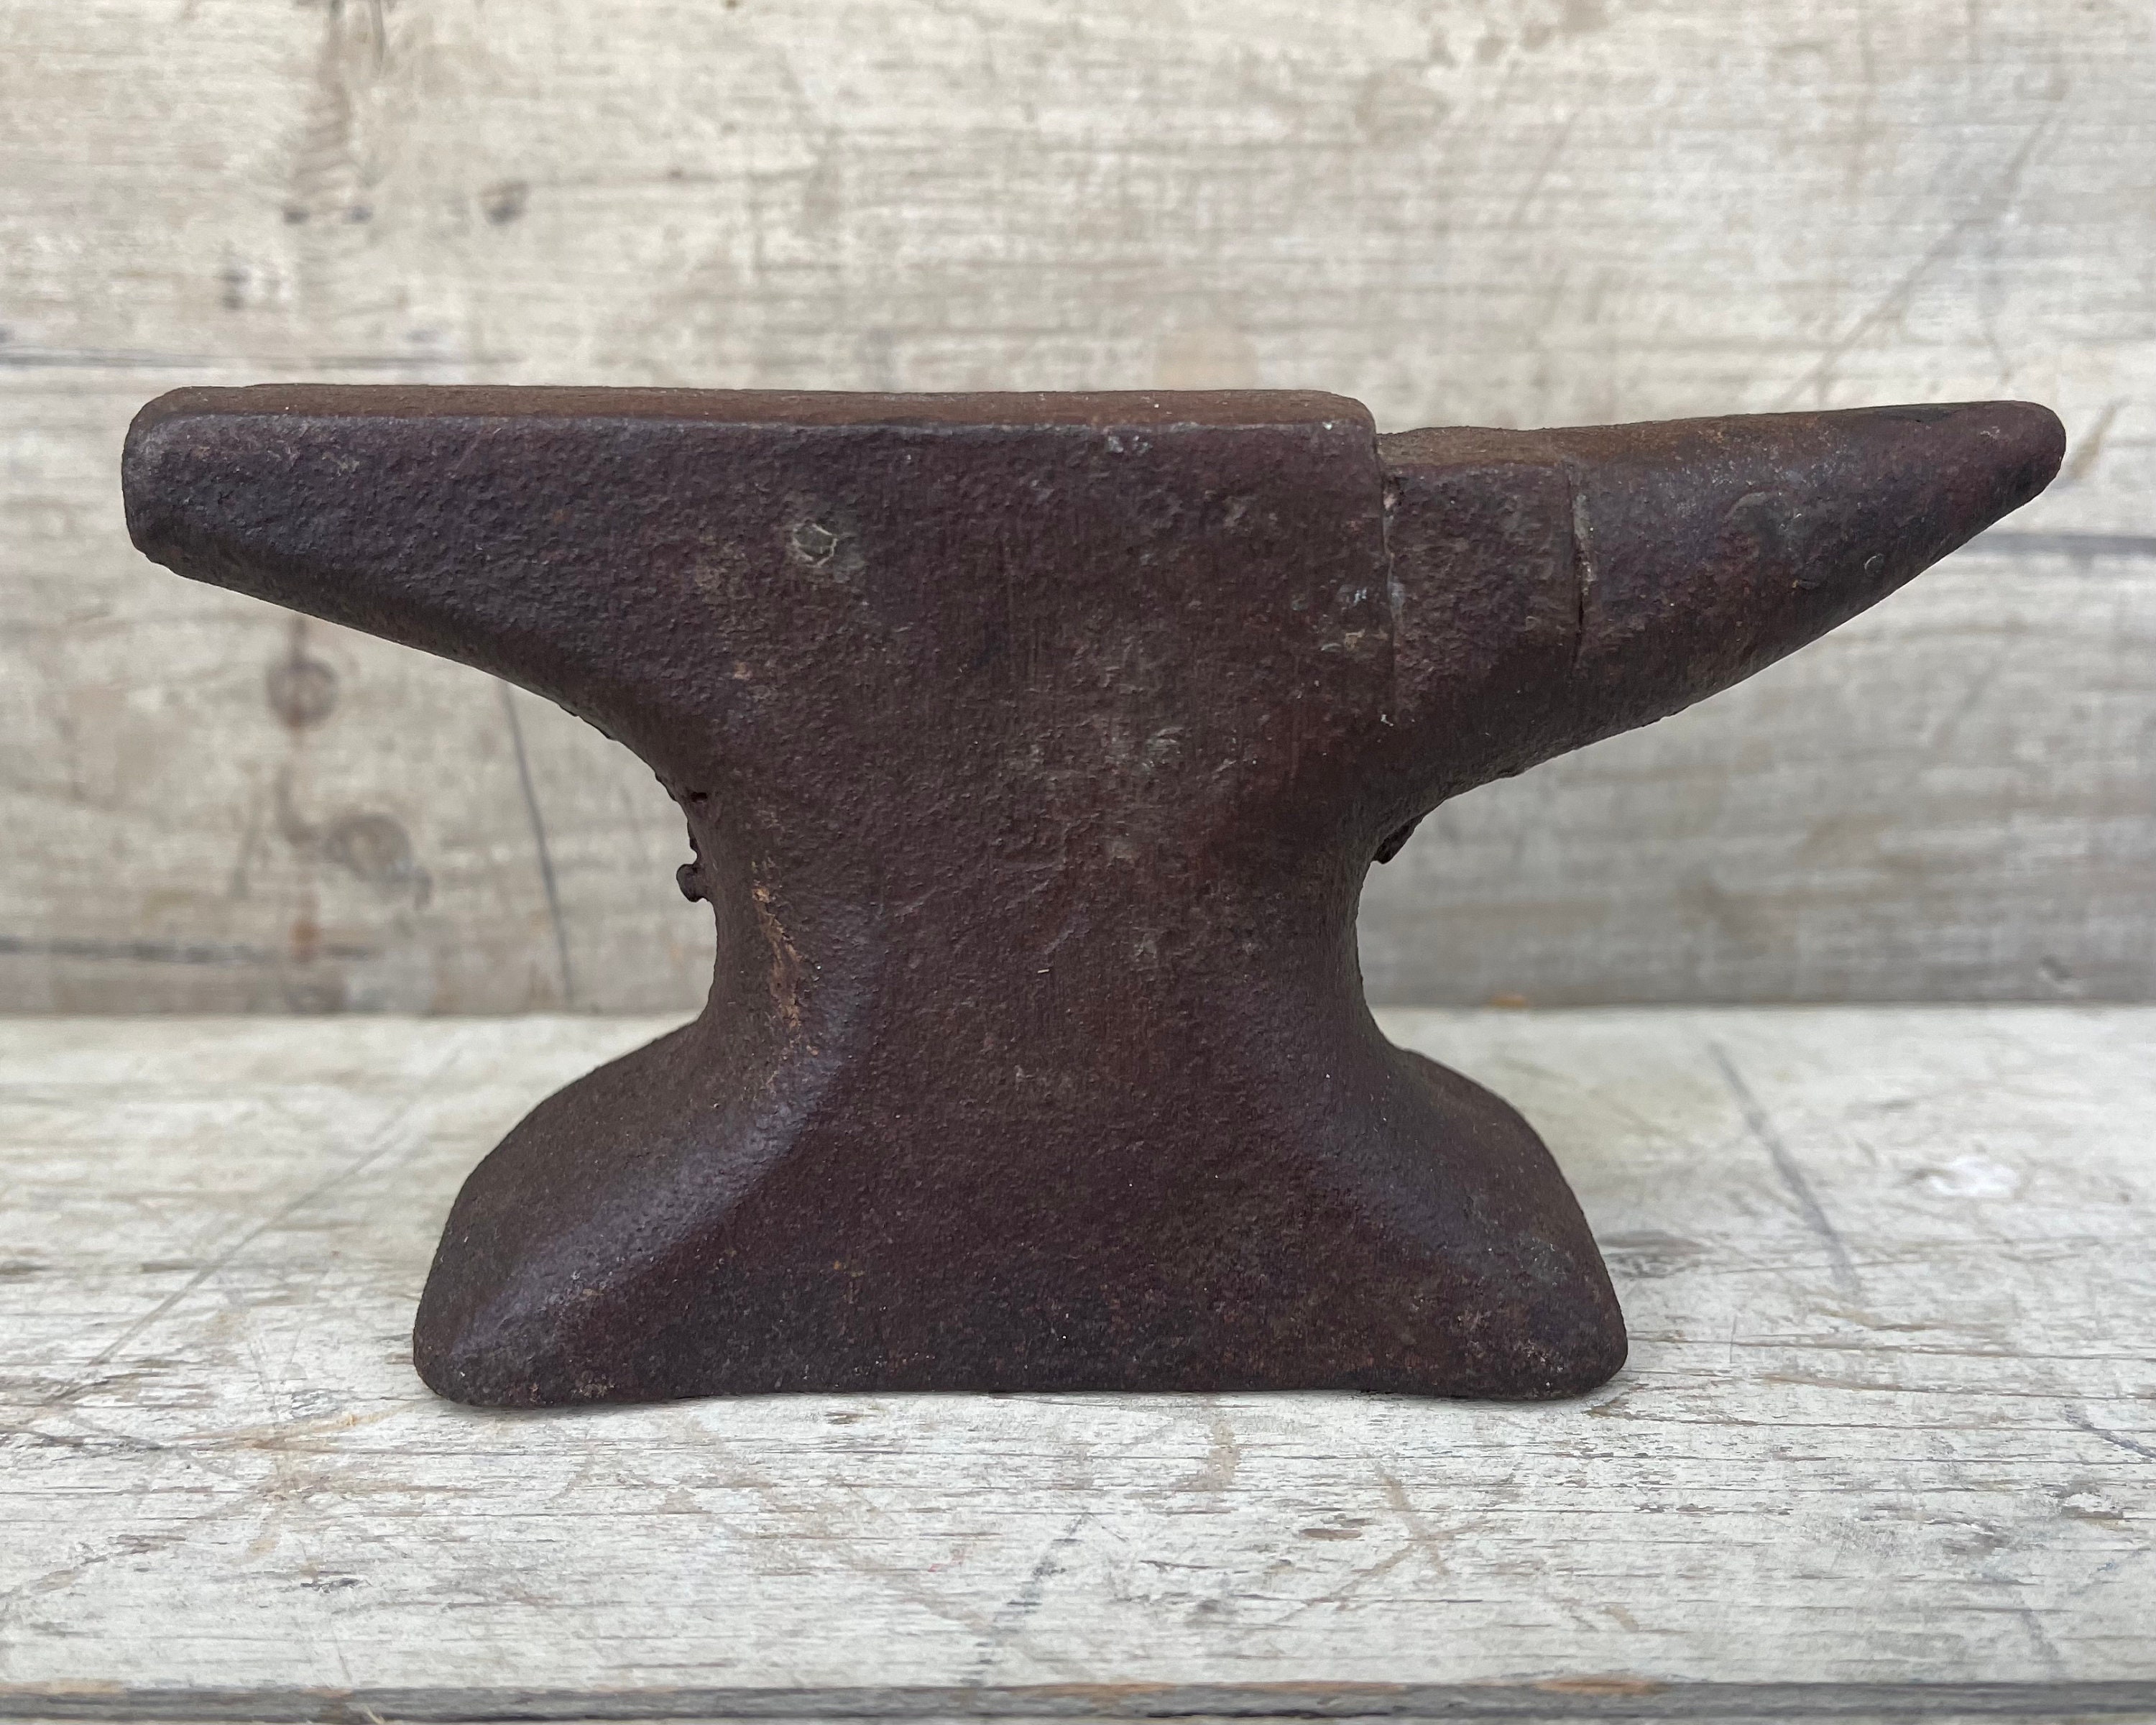 Anvil, Antique Cast Iron Anvil, 3 Lbs Anvil, Small Anvil, Jewelers Anvil  Tool, Blacksmith Tools, Farmhouse Antiques, Paperweight, Old Anvil 